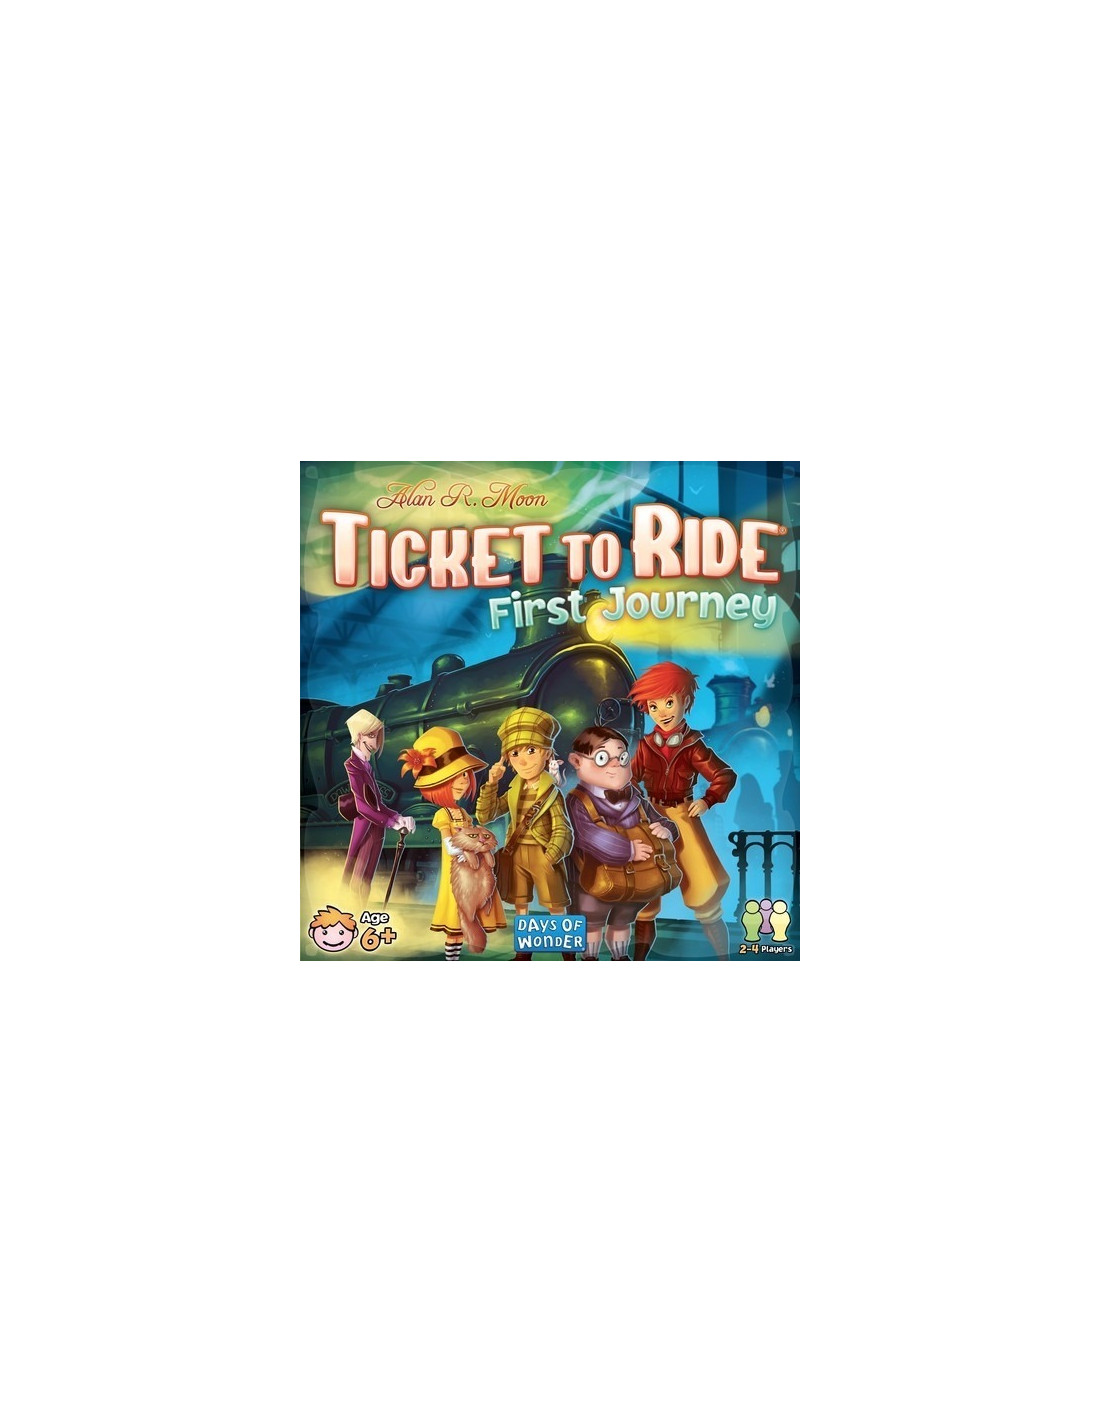 who made ticket to ride first song